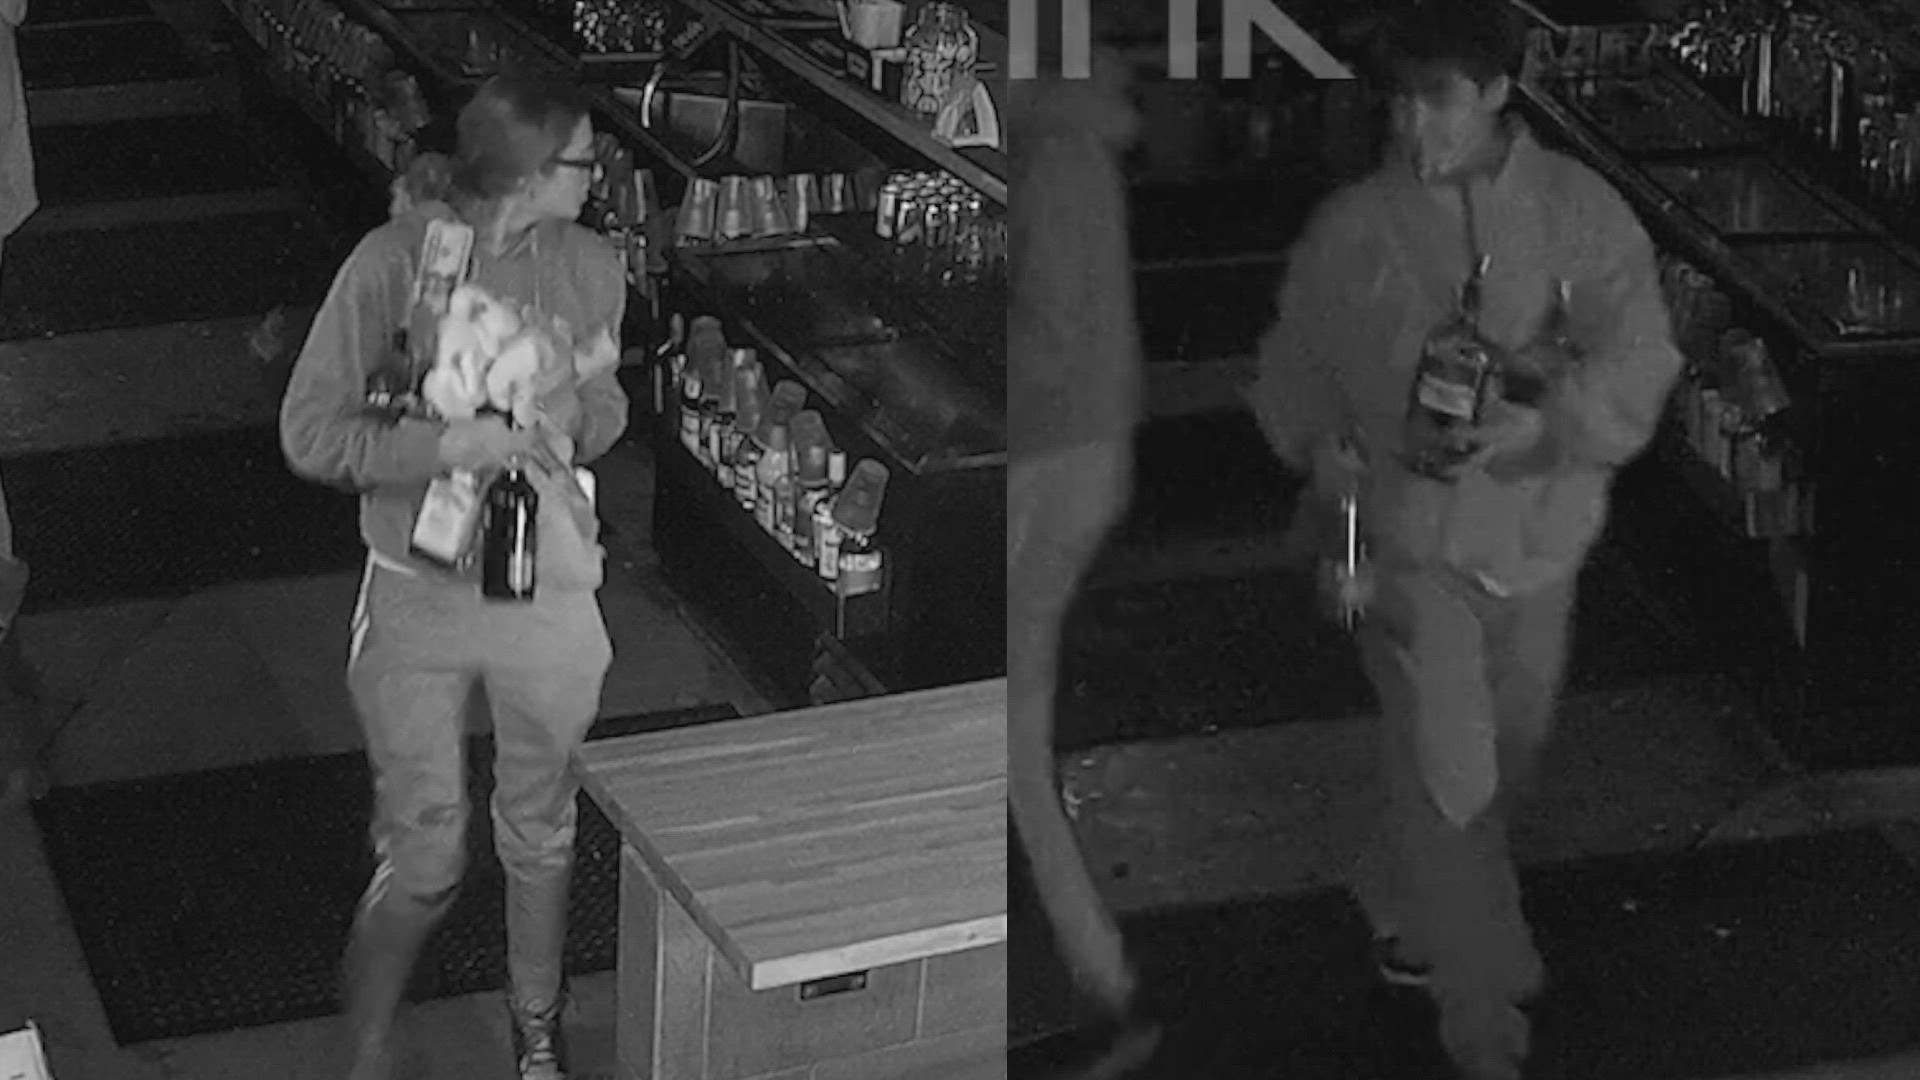 Security footage shows two women stealing from the Ringer Pub. The owner is glad they went for the cheap stuff, but says stealing from the staff was a Grinch move.